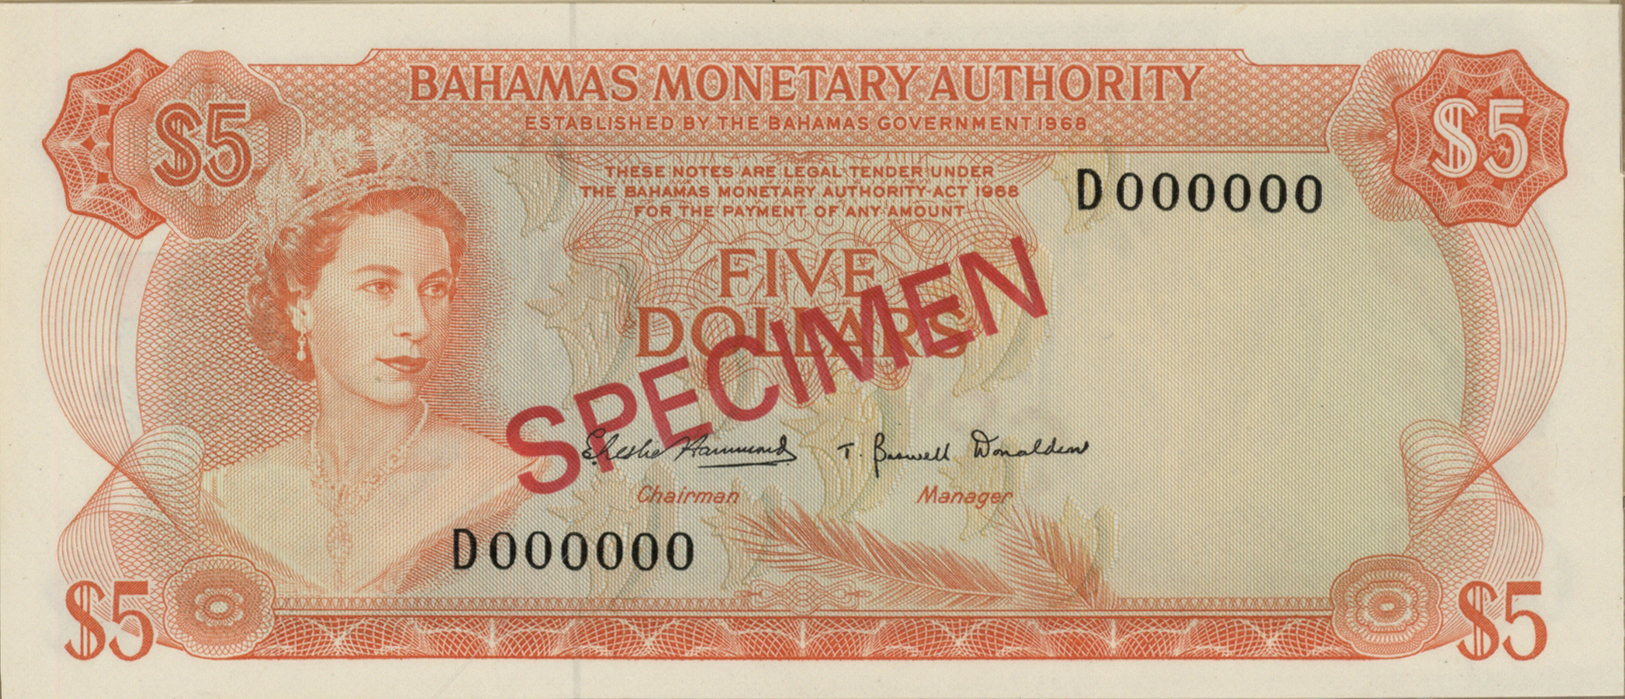 00222 Bahamas: complete set of 8 Specimen notes from 1/2 to 100 Dollars P. 26s-33s without cancellation holes, zero seri